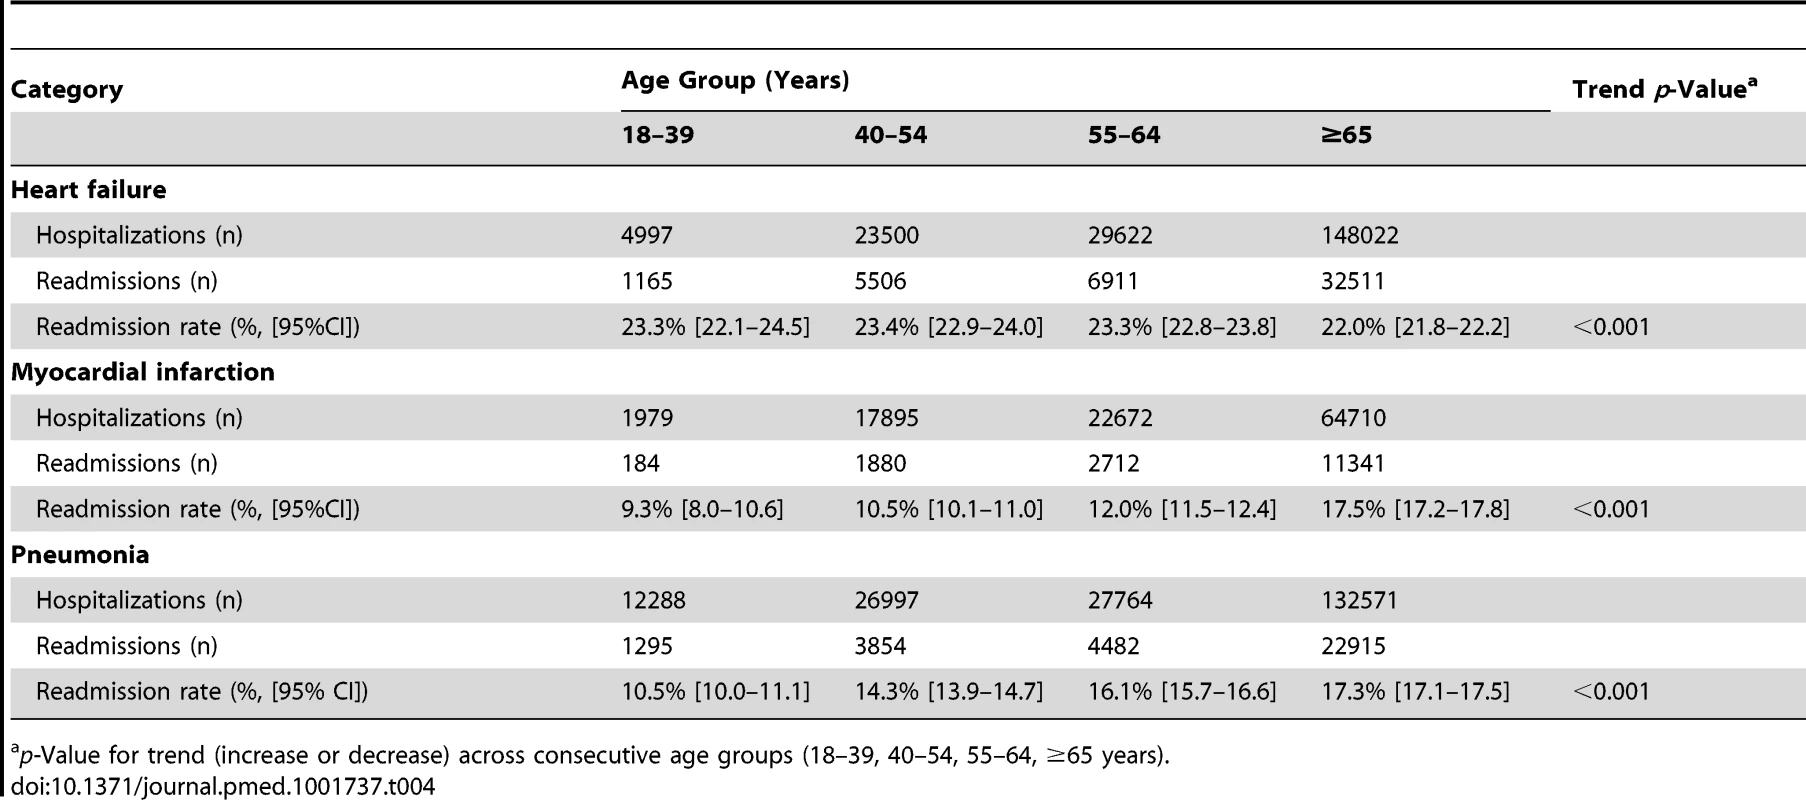 Hospitalization and readmissions among age groups for HF, AMI, and pneumonia.